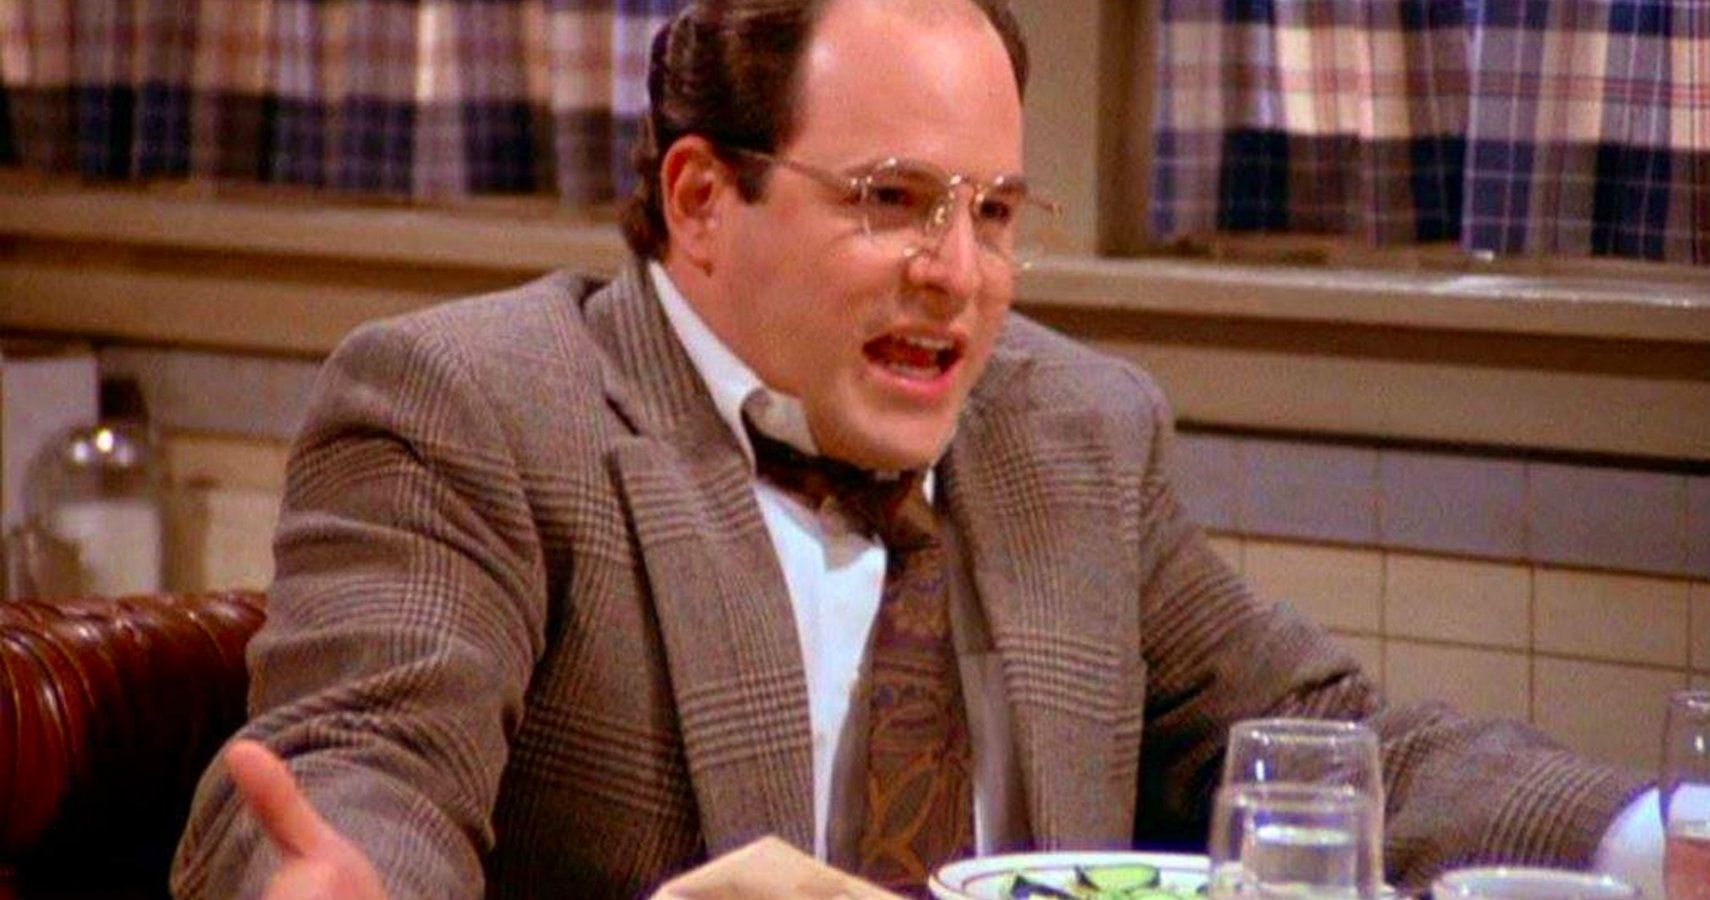 Seinfeld: The 8 George Costanza Outbursts That Make Us Laugh-Cry